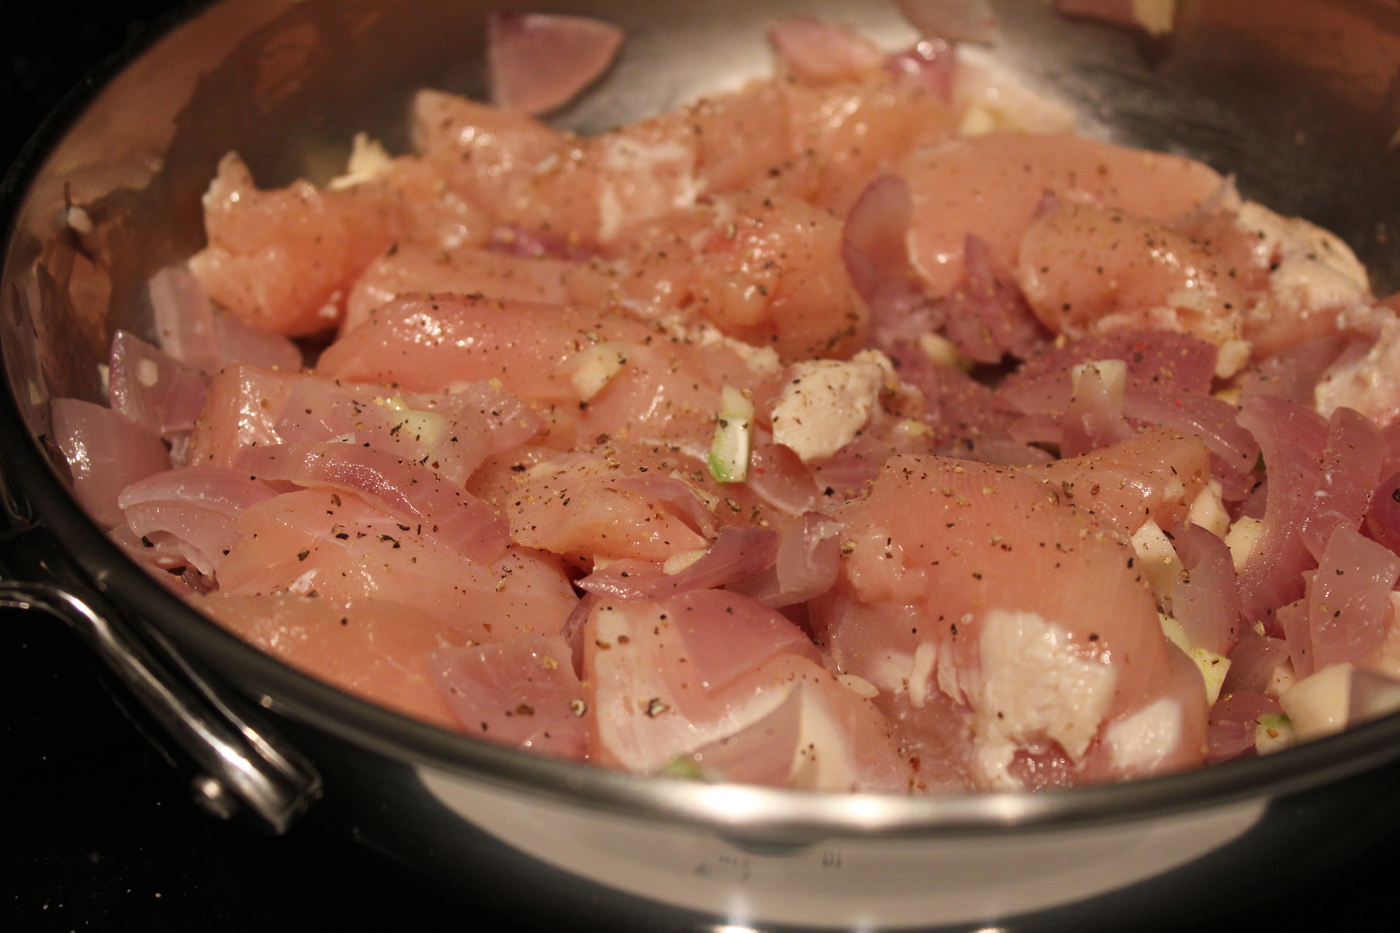 Chicken breast sautéed with garlic and onion